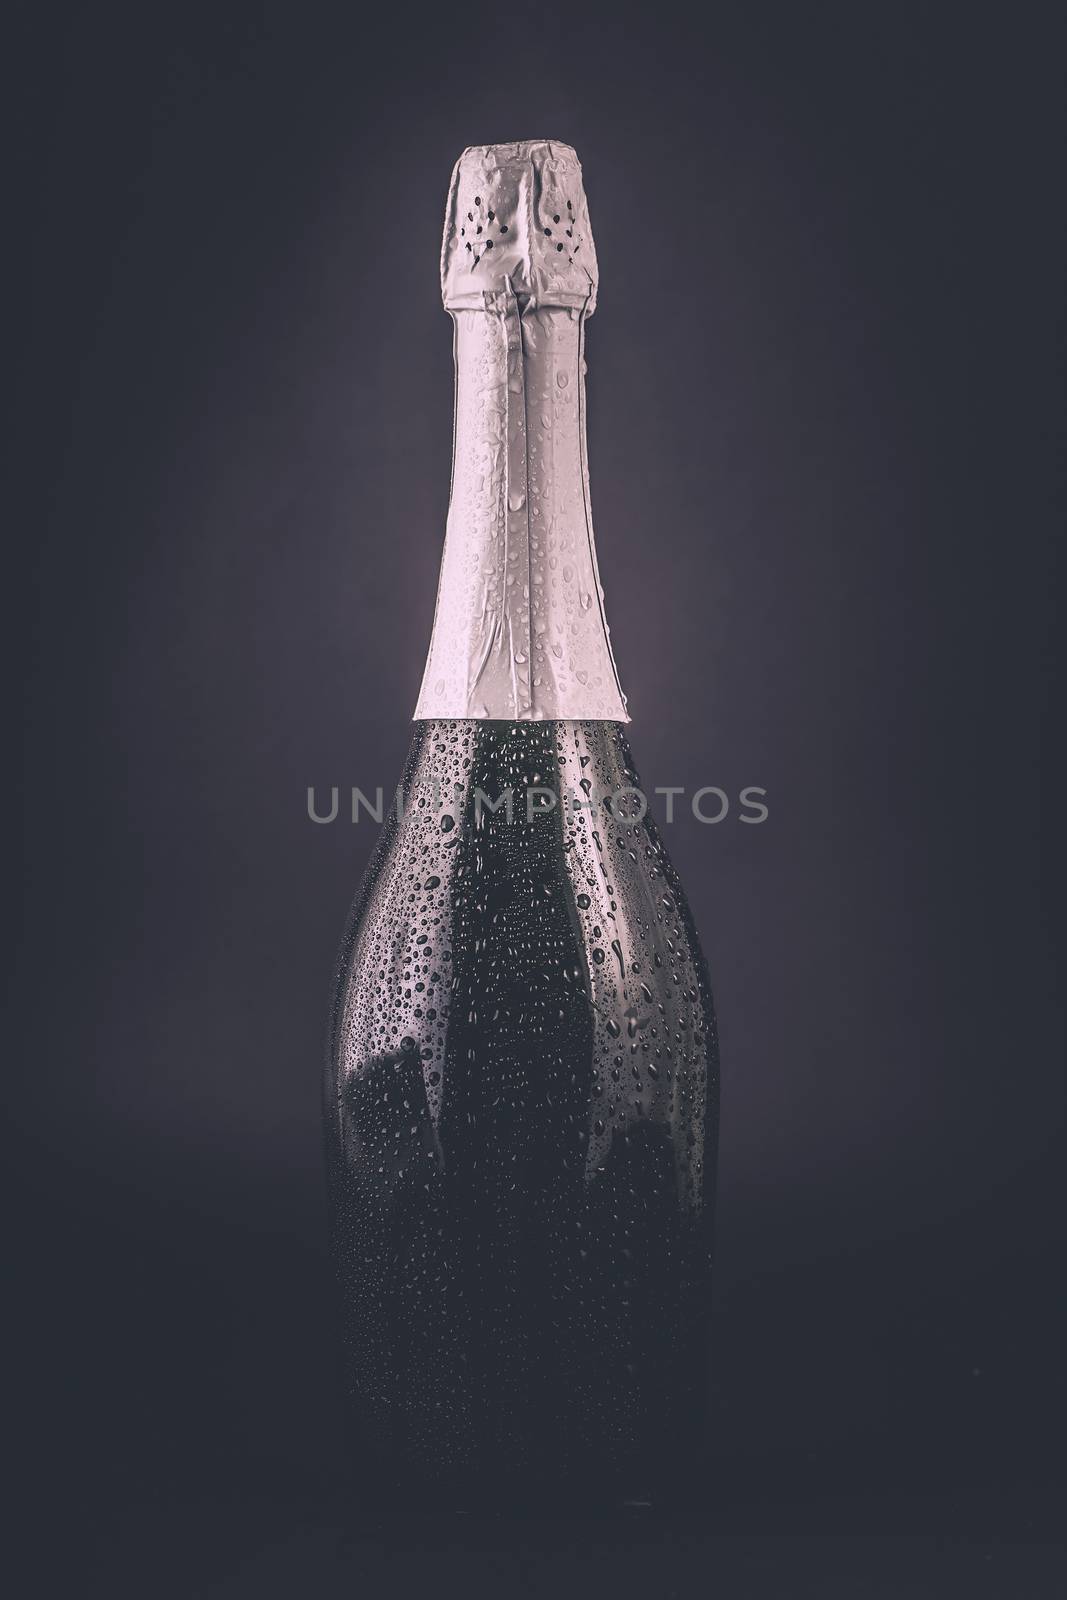 bottle of champagne in the drops of water on a dark background